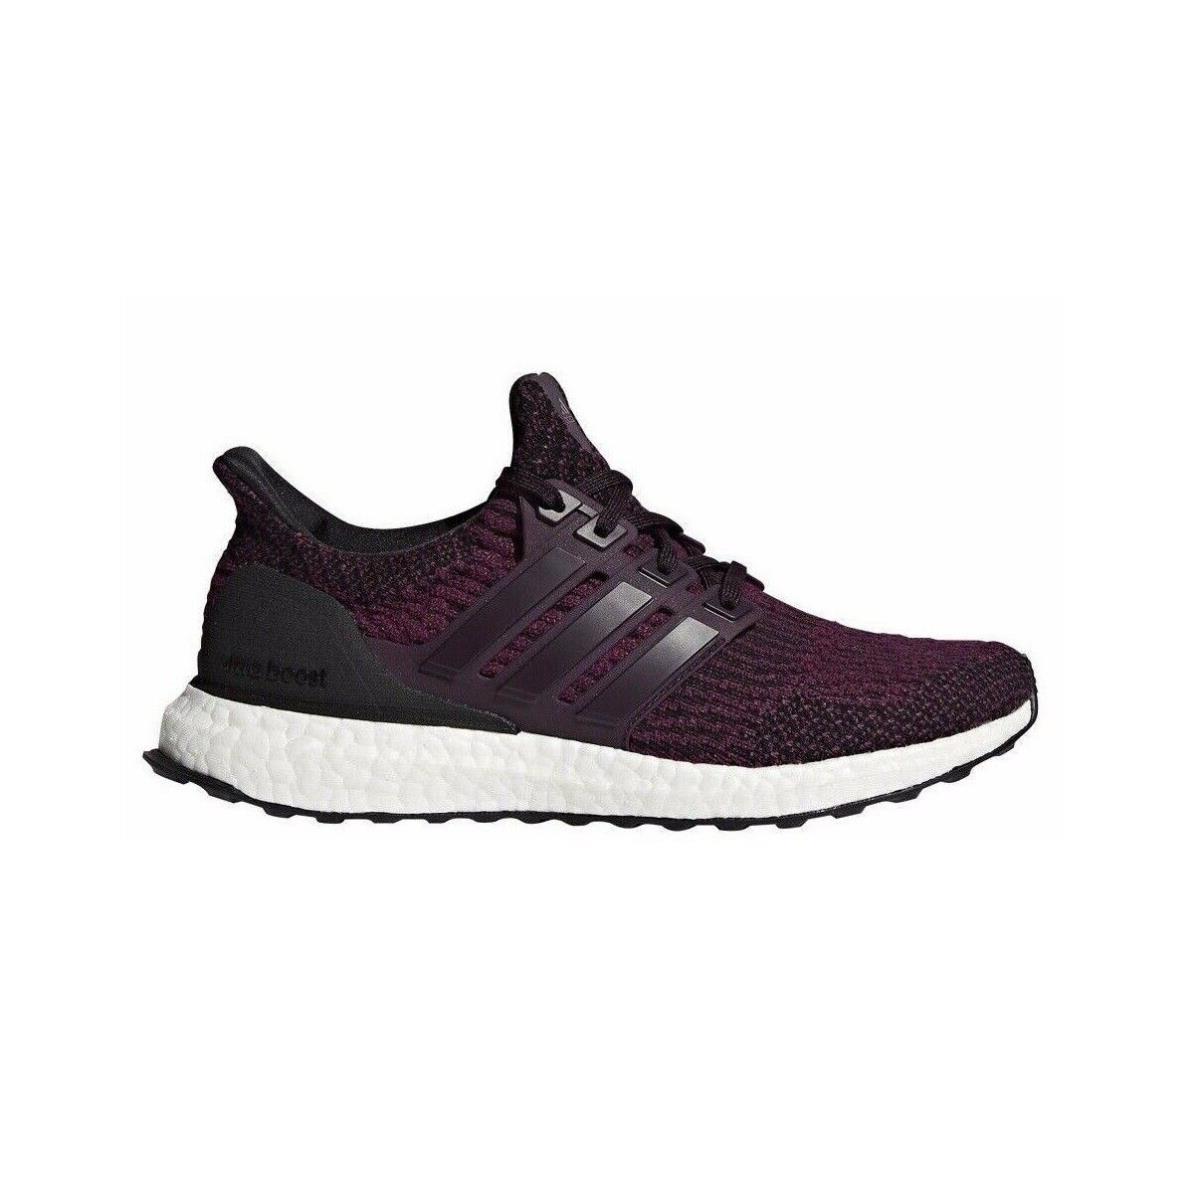 Adidas Ultraboost W Red Night Black Running Sneakers S82058 469 Women`s Shoes